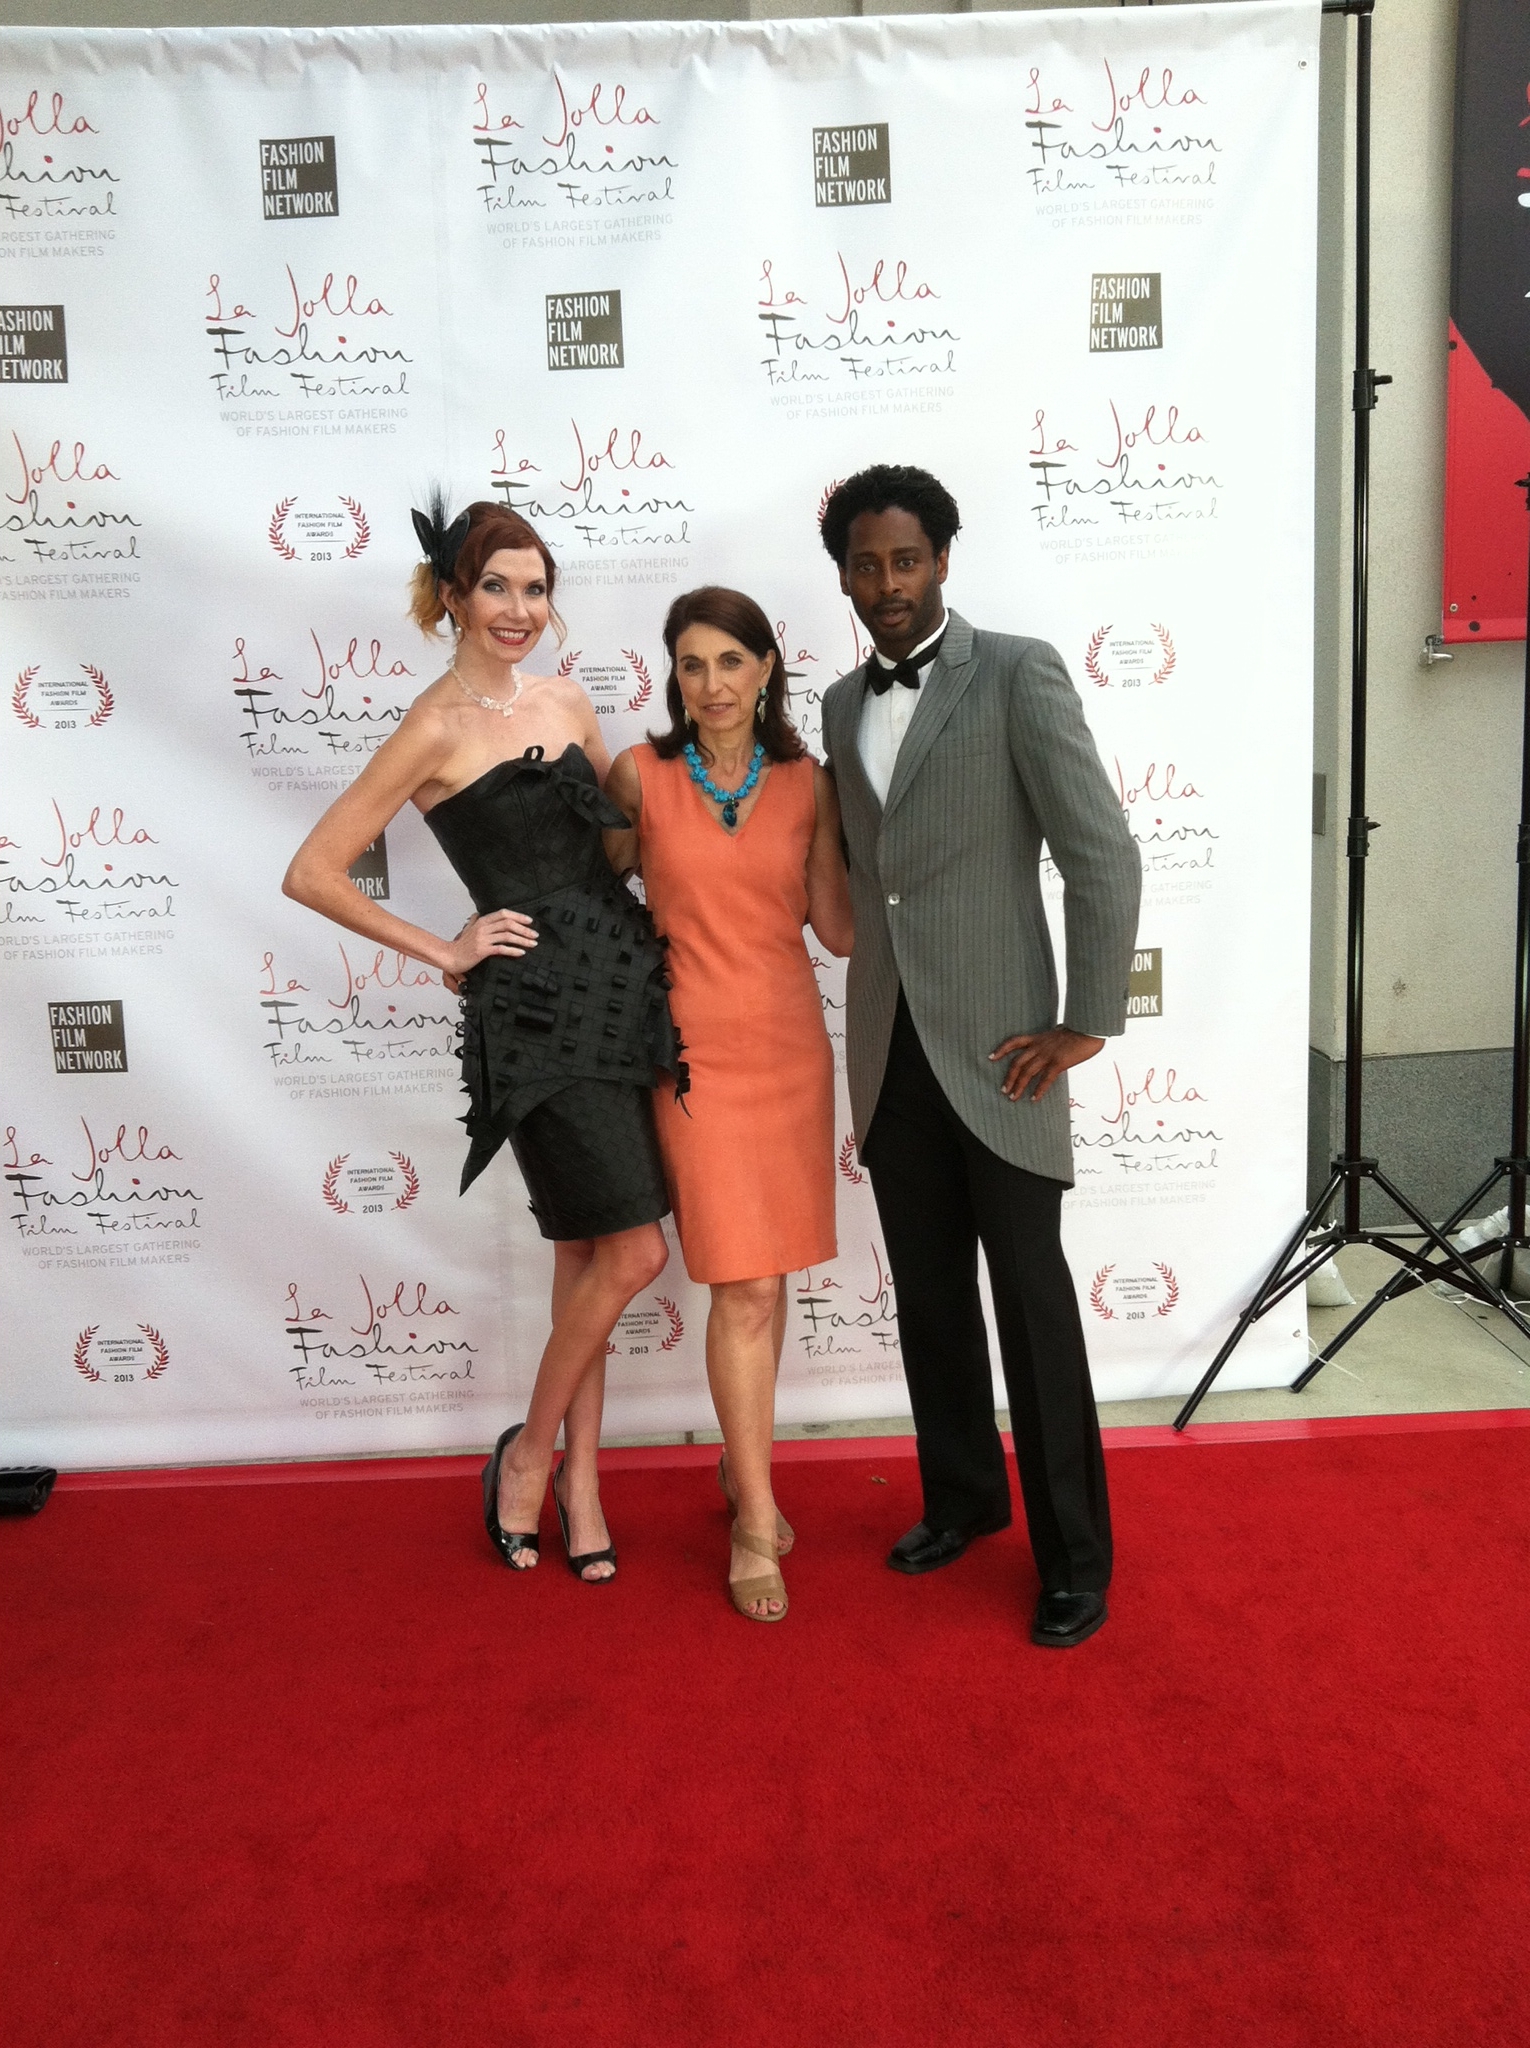 On the red carpet with my co-host & agent for the 4th annual La Jolla Fashion Film Festival